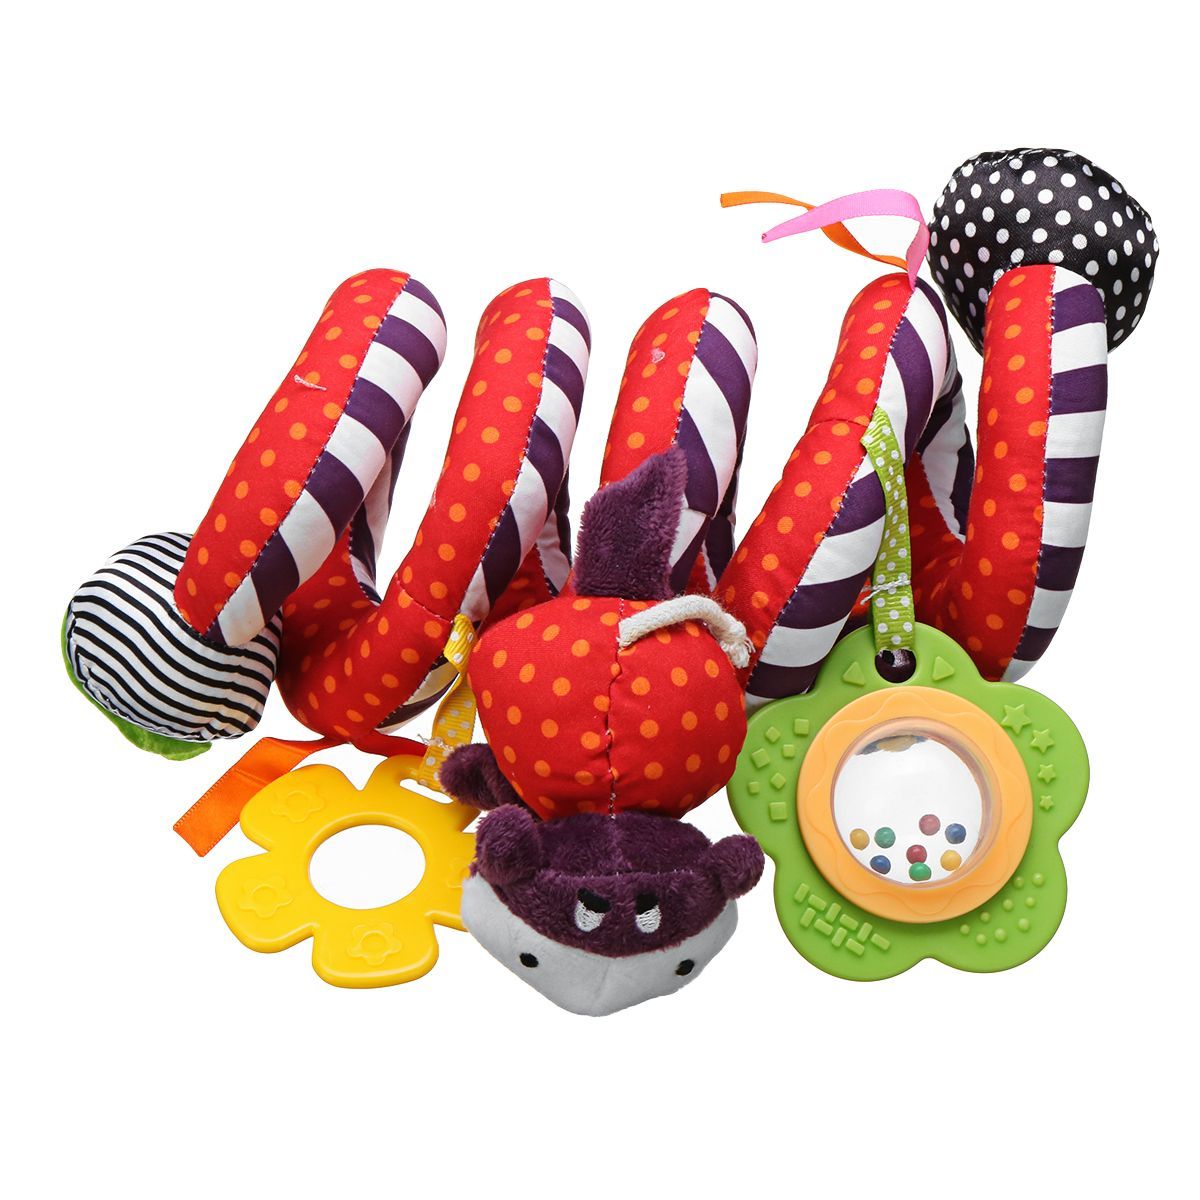 Infant-Bed-Hanging-Baby-Stroller-Rattle-Crib-Plush-Spiral-Roll-Toy-Decorations-1560137